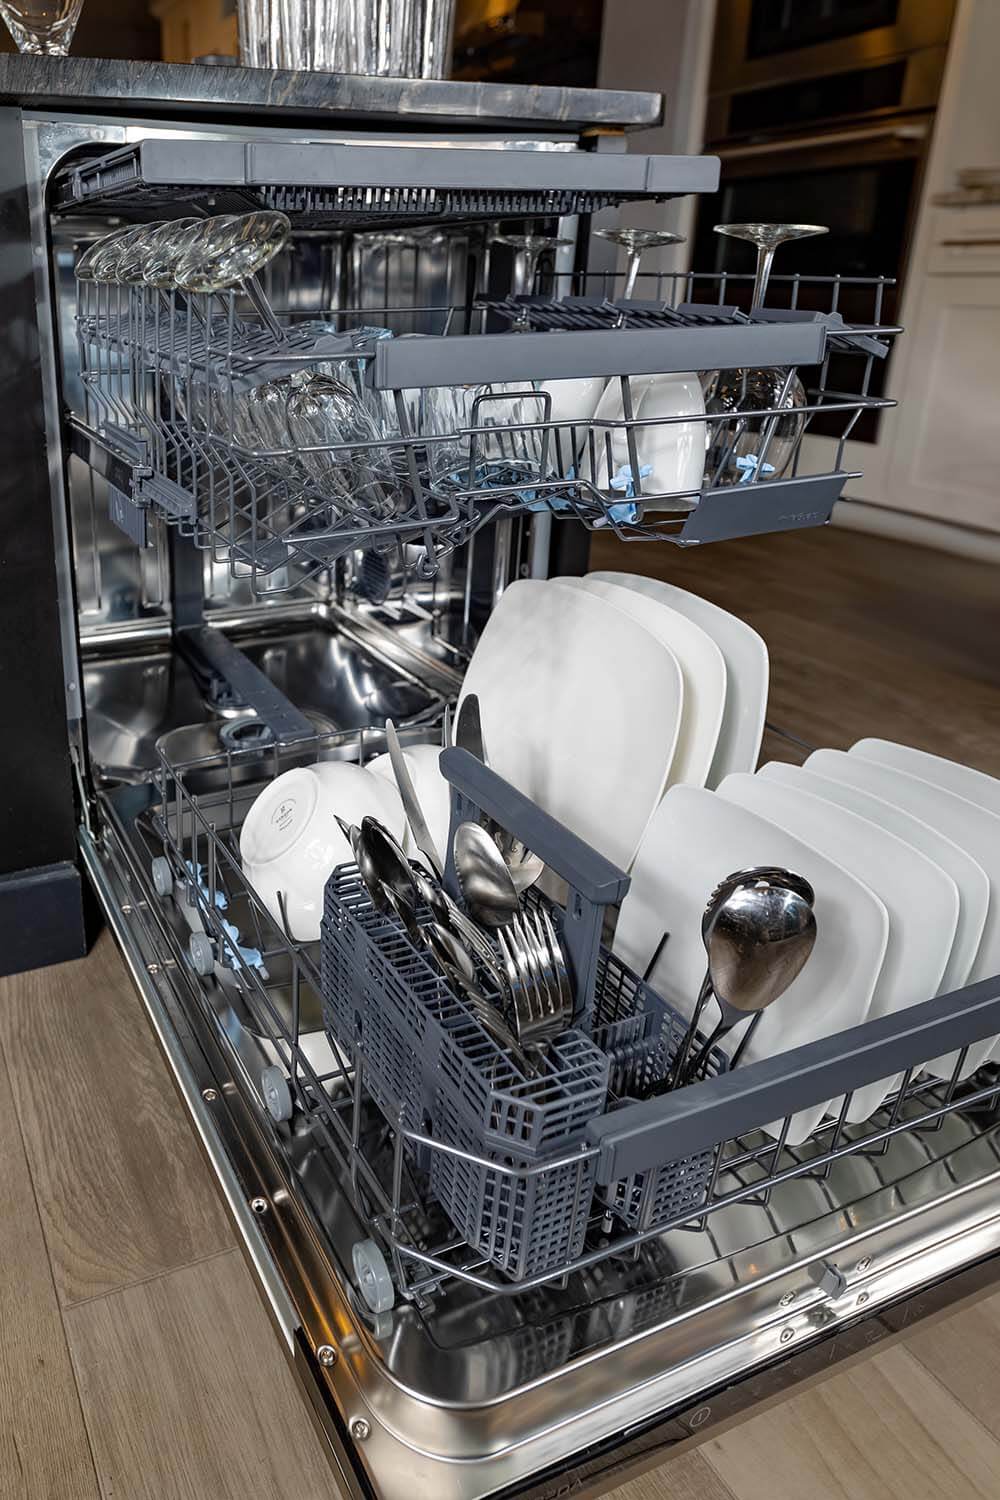 BREDA dishwasher with 3 racks loaded with dishes